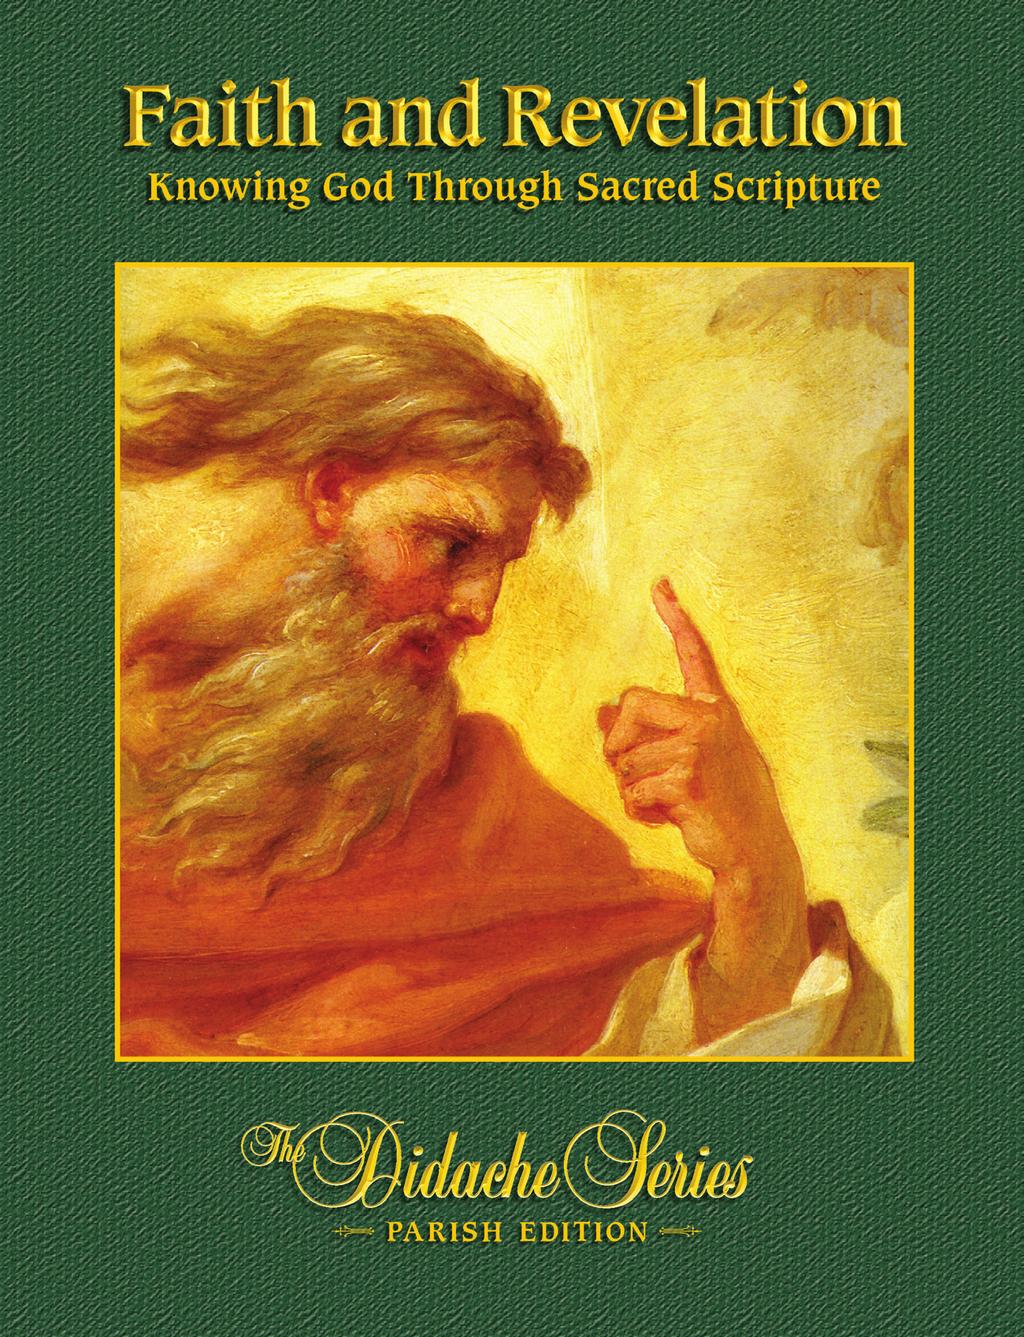 FAITH AND REVELATION Knoing God Through Sacred Scripture Ho to Use This Presenter s Guide BEFORE THE FIRST SESSION Overvie of hapter 1 Be sure that you and each of the participants have a cy of this